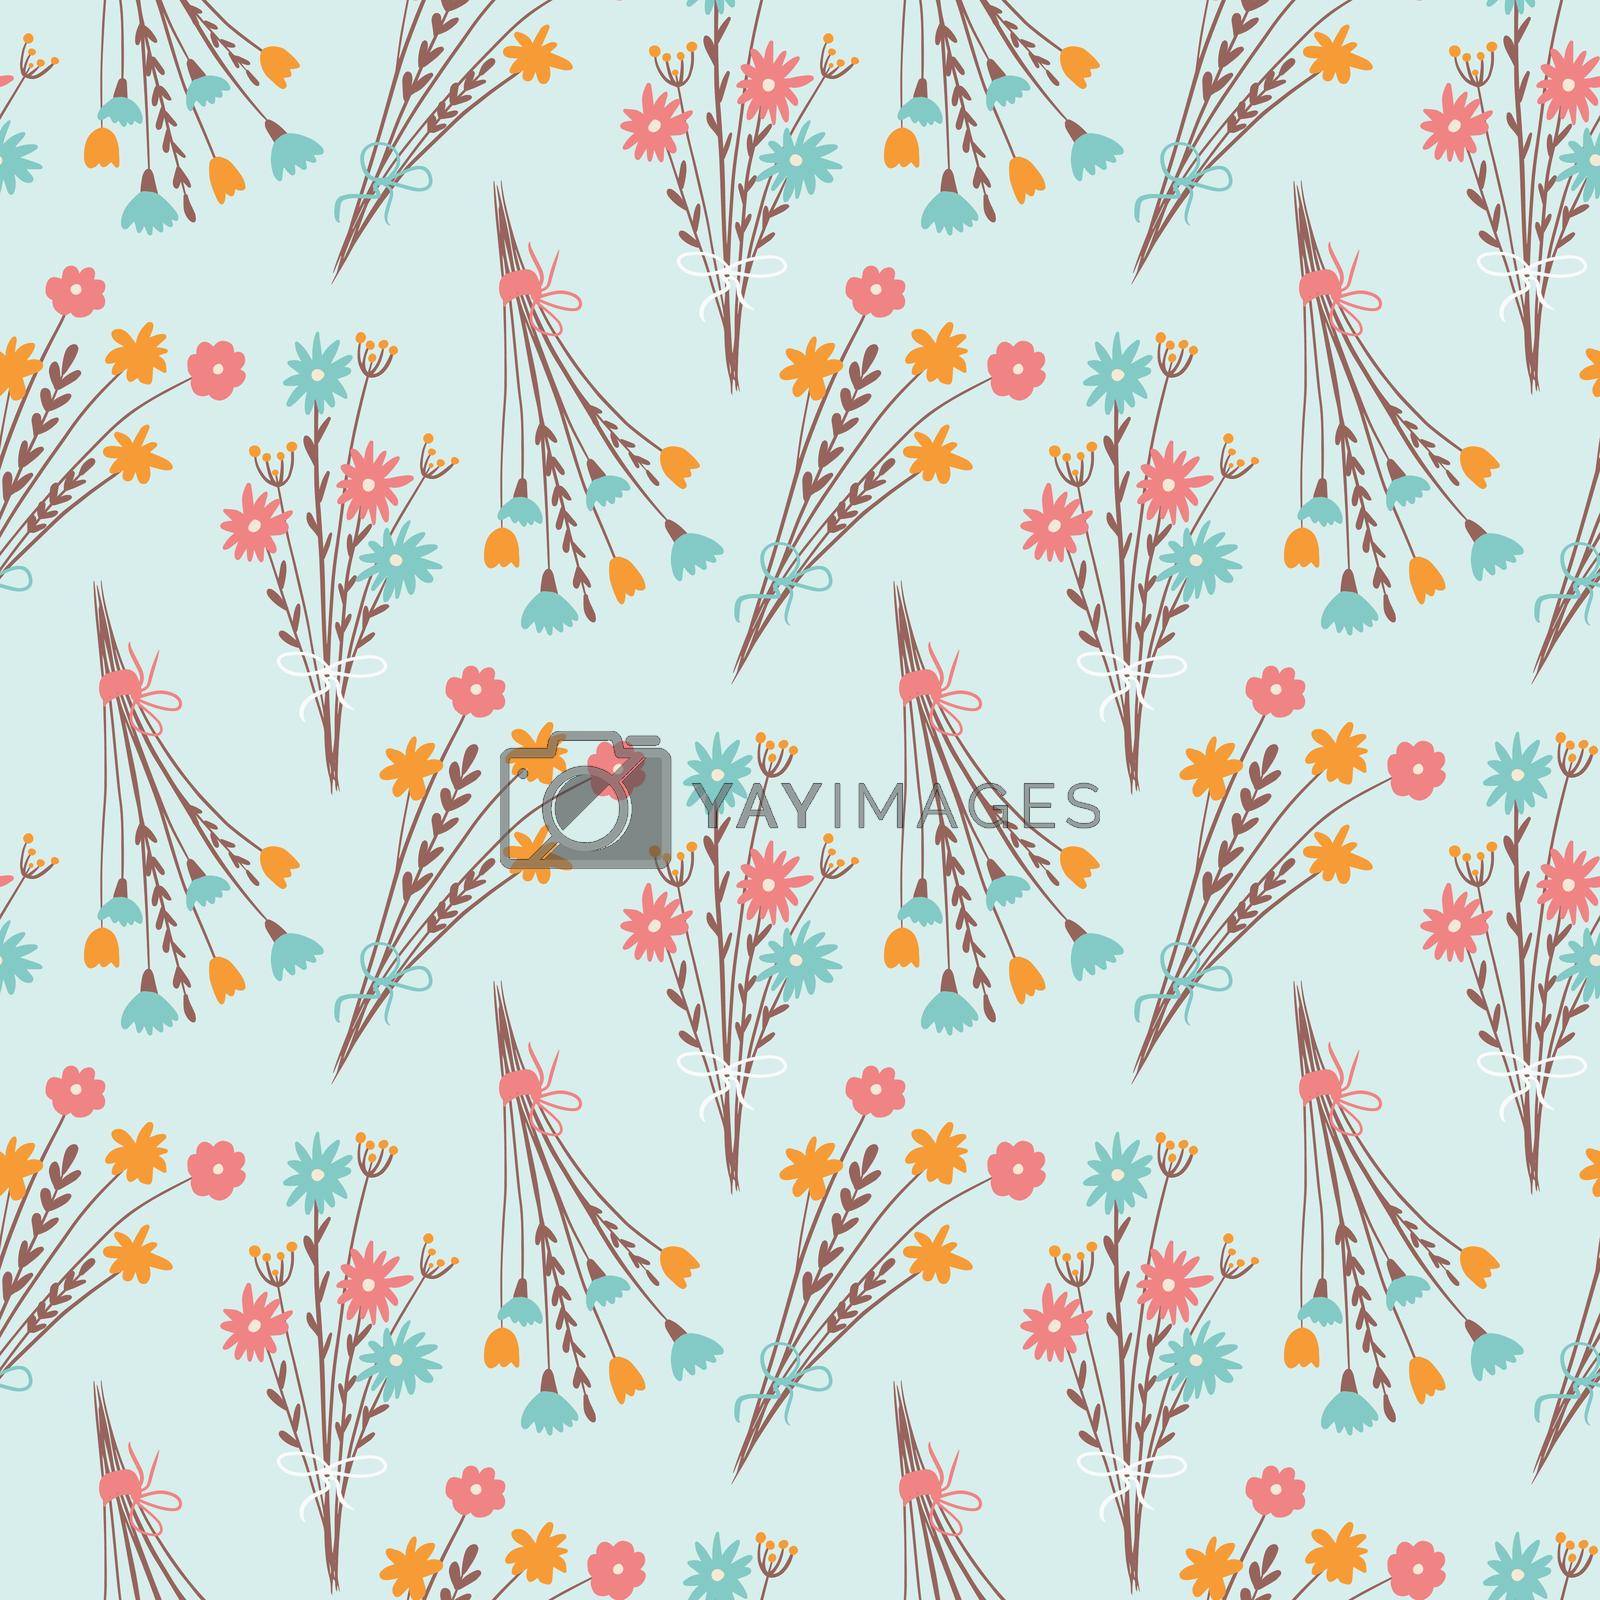 Royalty free image of Hand drawn bouquets of flowers with rope bow. Floral design, seamless vector pattern for printing on fabric or paper products by vetriciya_art